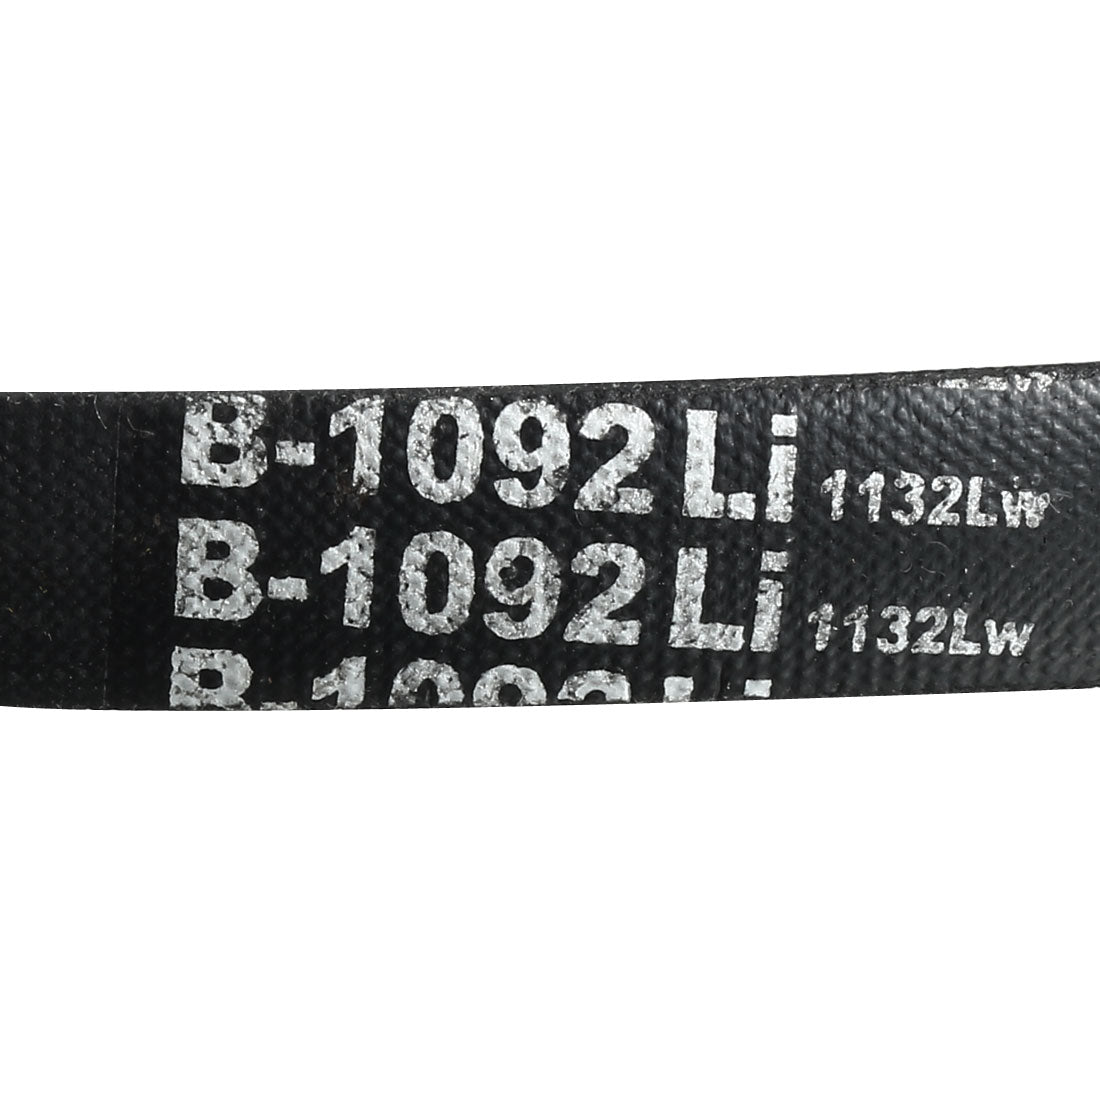 uxcell Uxcell B1092 Rubber Transmission Driving Belt V-Belt 17mm Width x 11mm Thickness